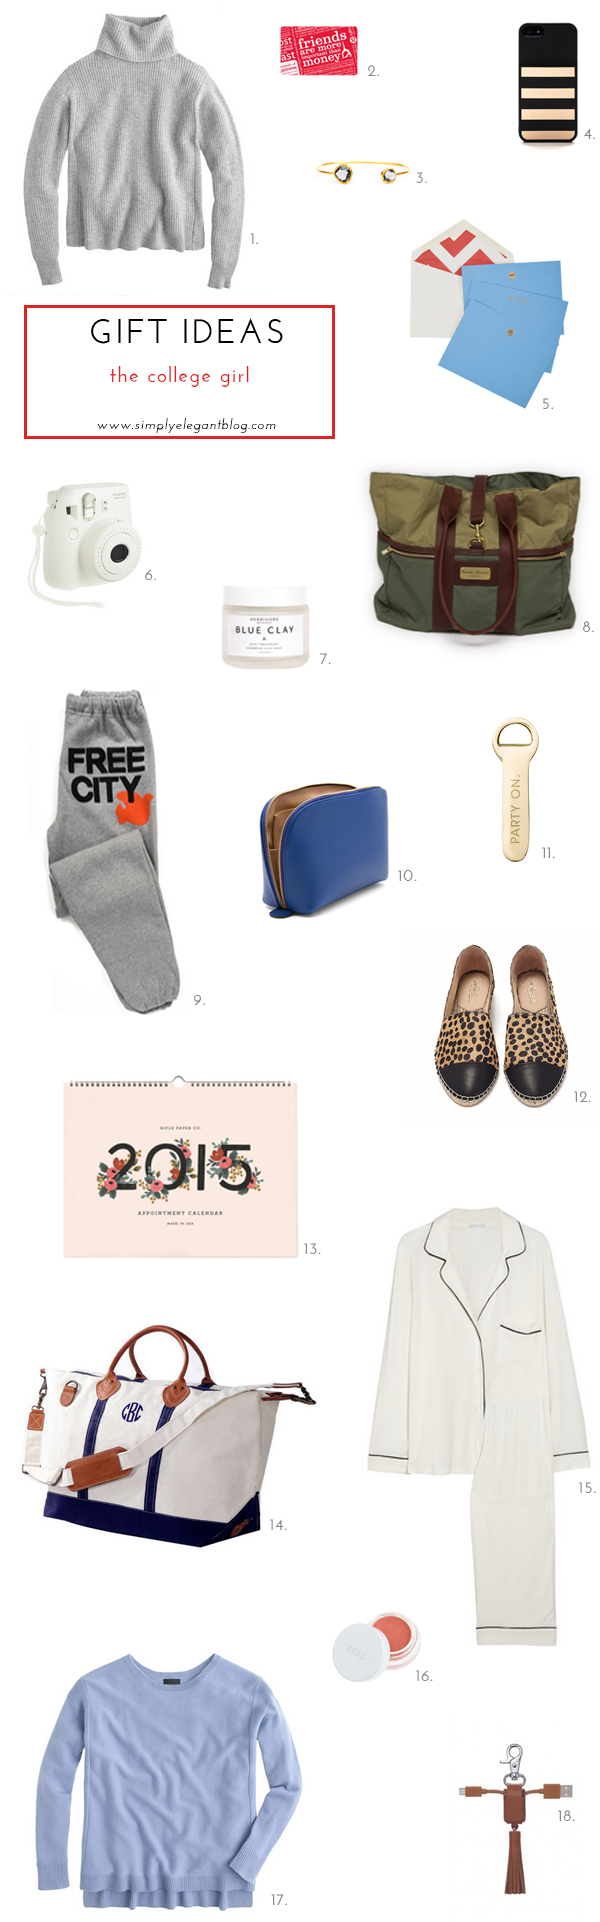 gift ideas for college girls